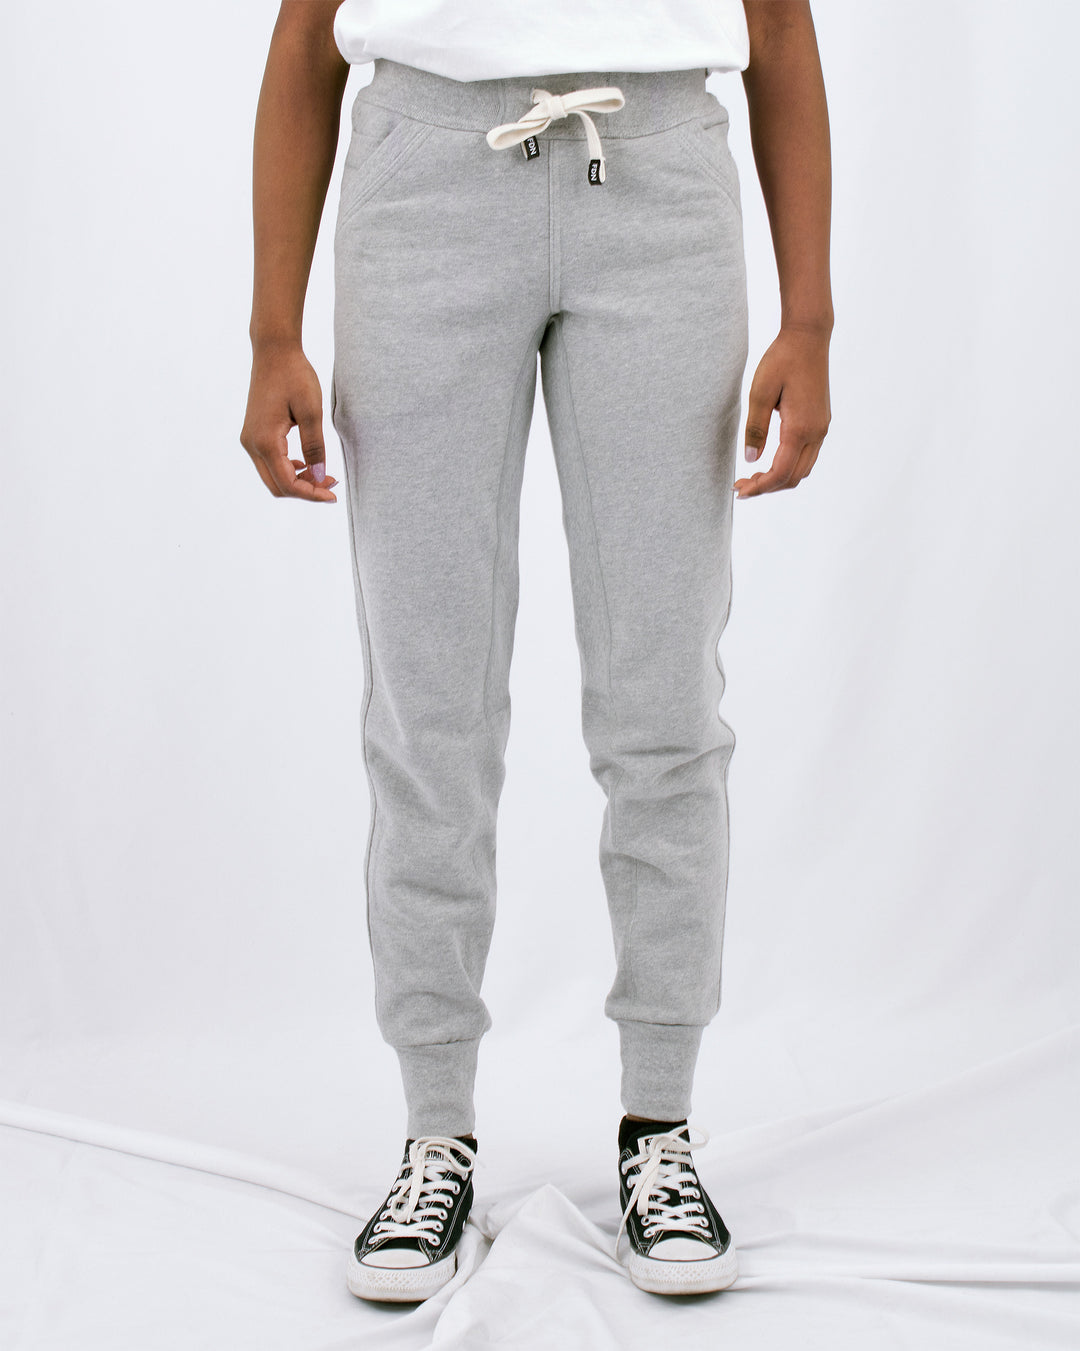 Sustainable Mens Womens Warm loungewear Sweat Pants Comfortable Luxury Light Grey Sueded Napped Soft French Felted Cotton Terry Fabriqué au Canada. High Waisted with slim tailoring in the leg. Angled front pockets with interior cellphone pockets and inner leg rib gusset. Cotton Drawcord FDN clothing made in canada